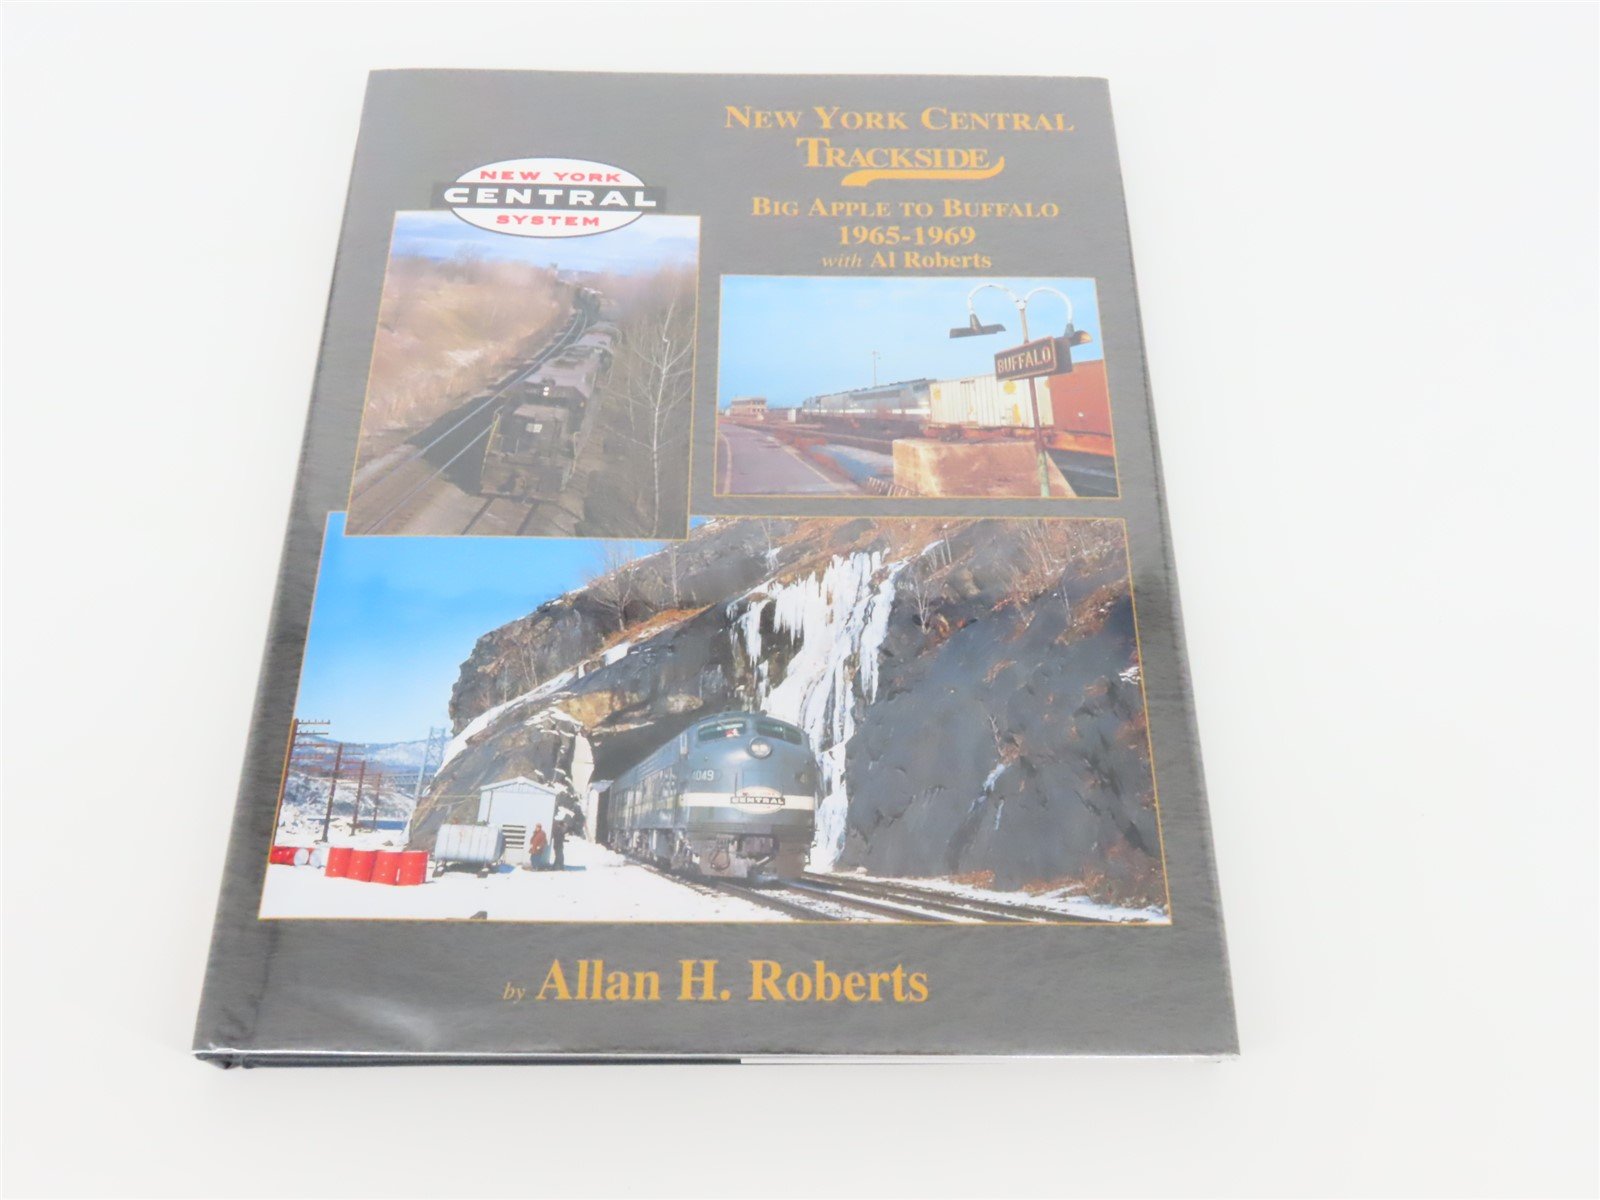 Morning Sun: New York Central Trackside 1965-1969 by Allan H. Roberts ©2012 HC